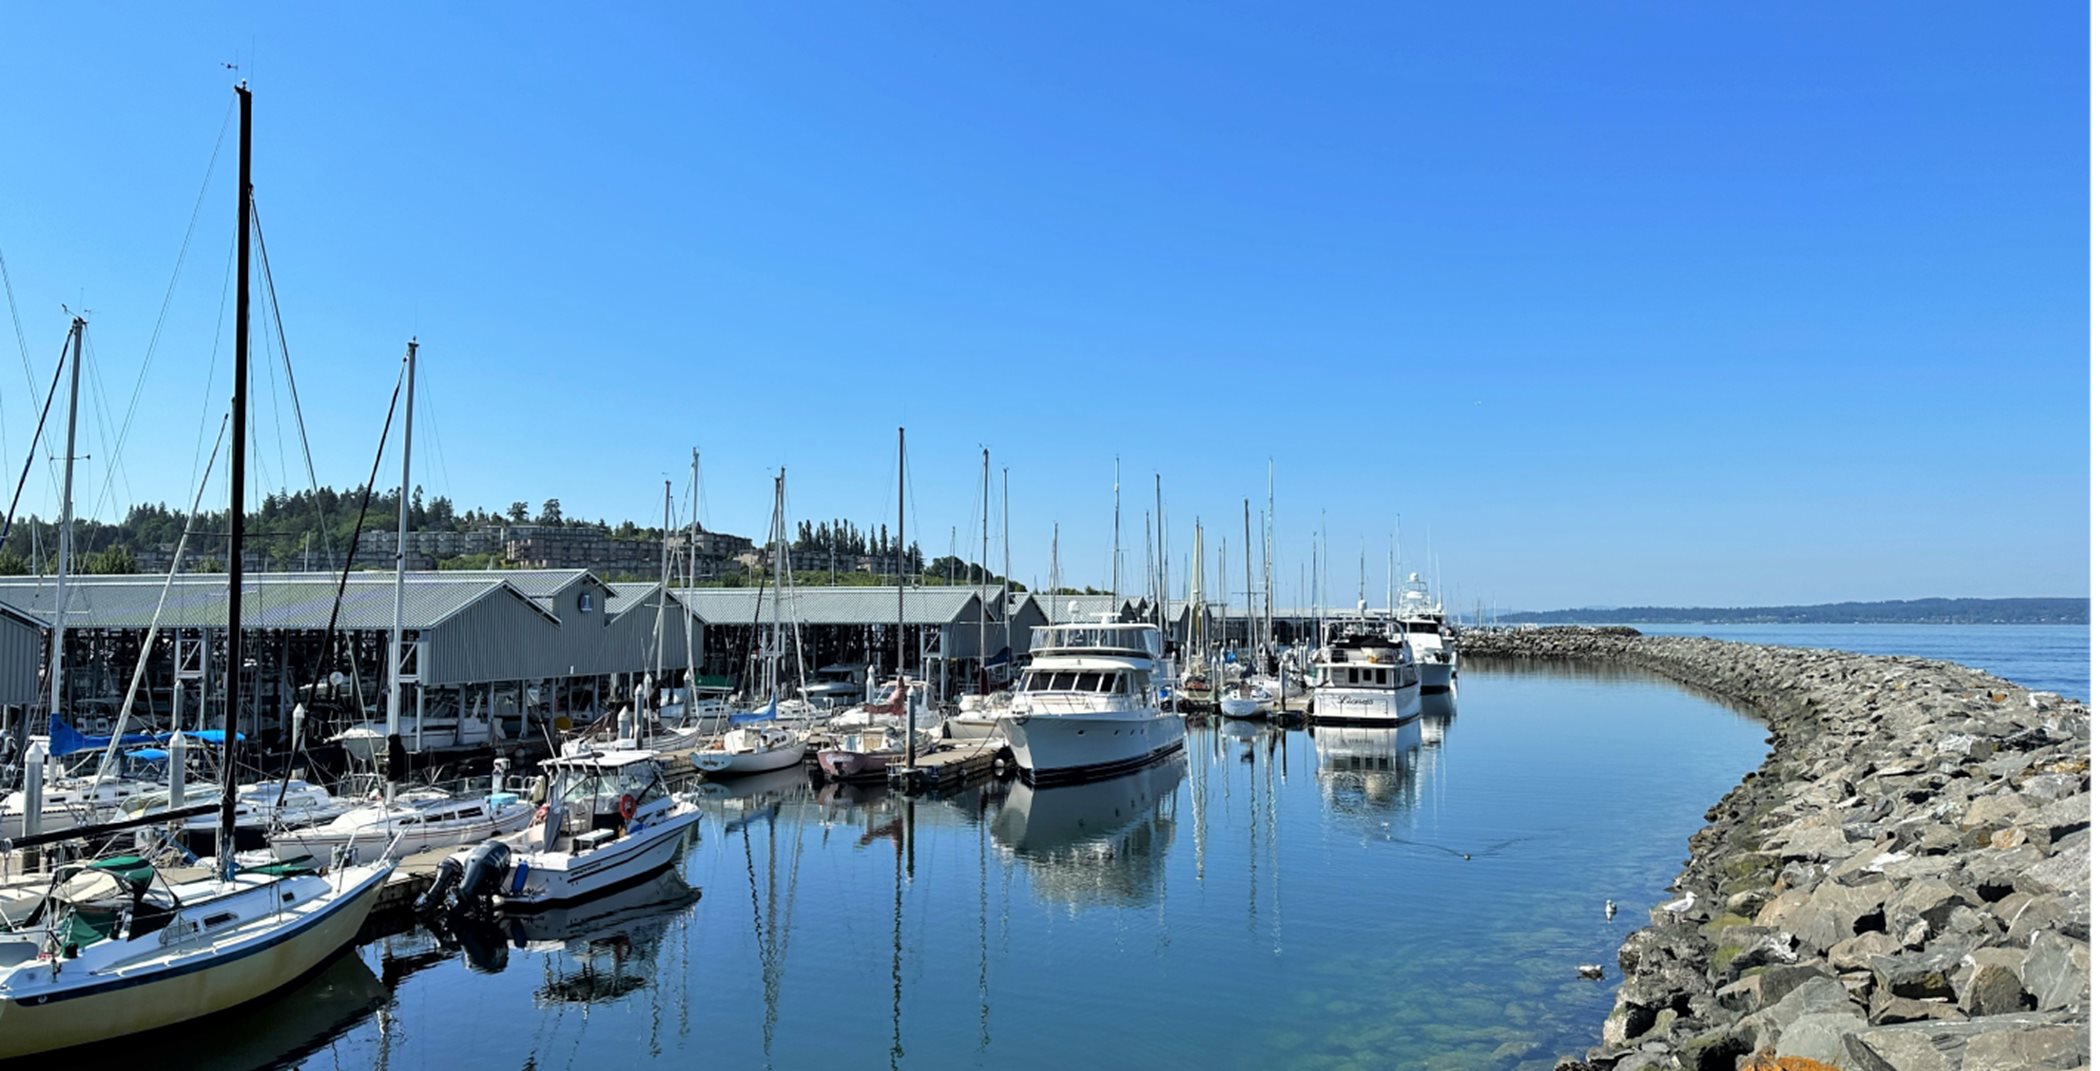 Marina in the Puget Sound with boats docked